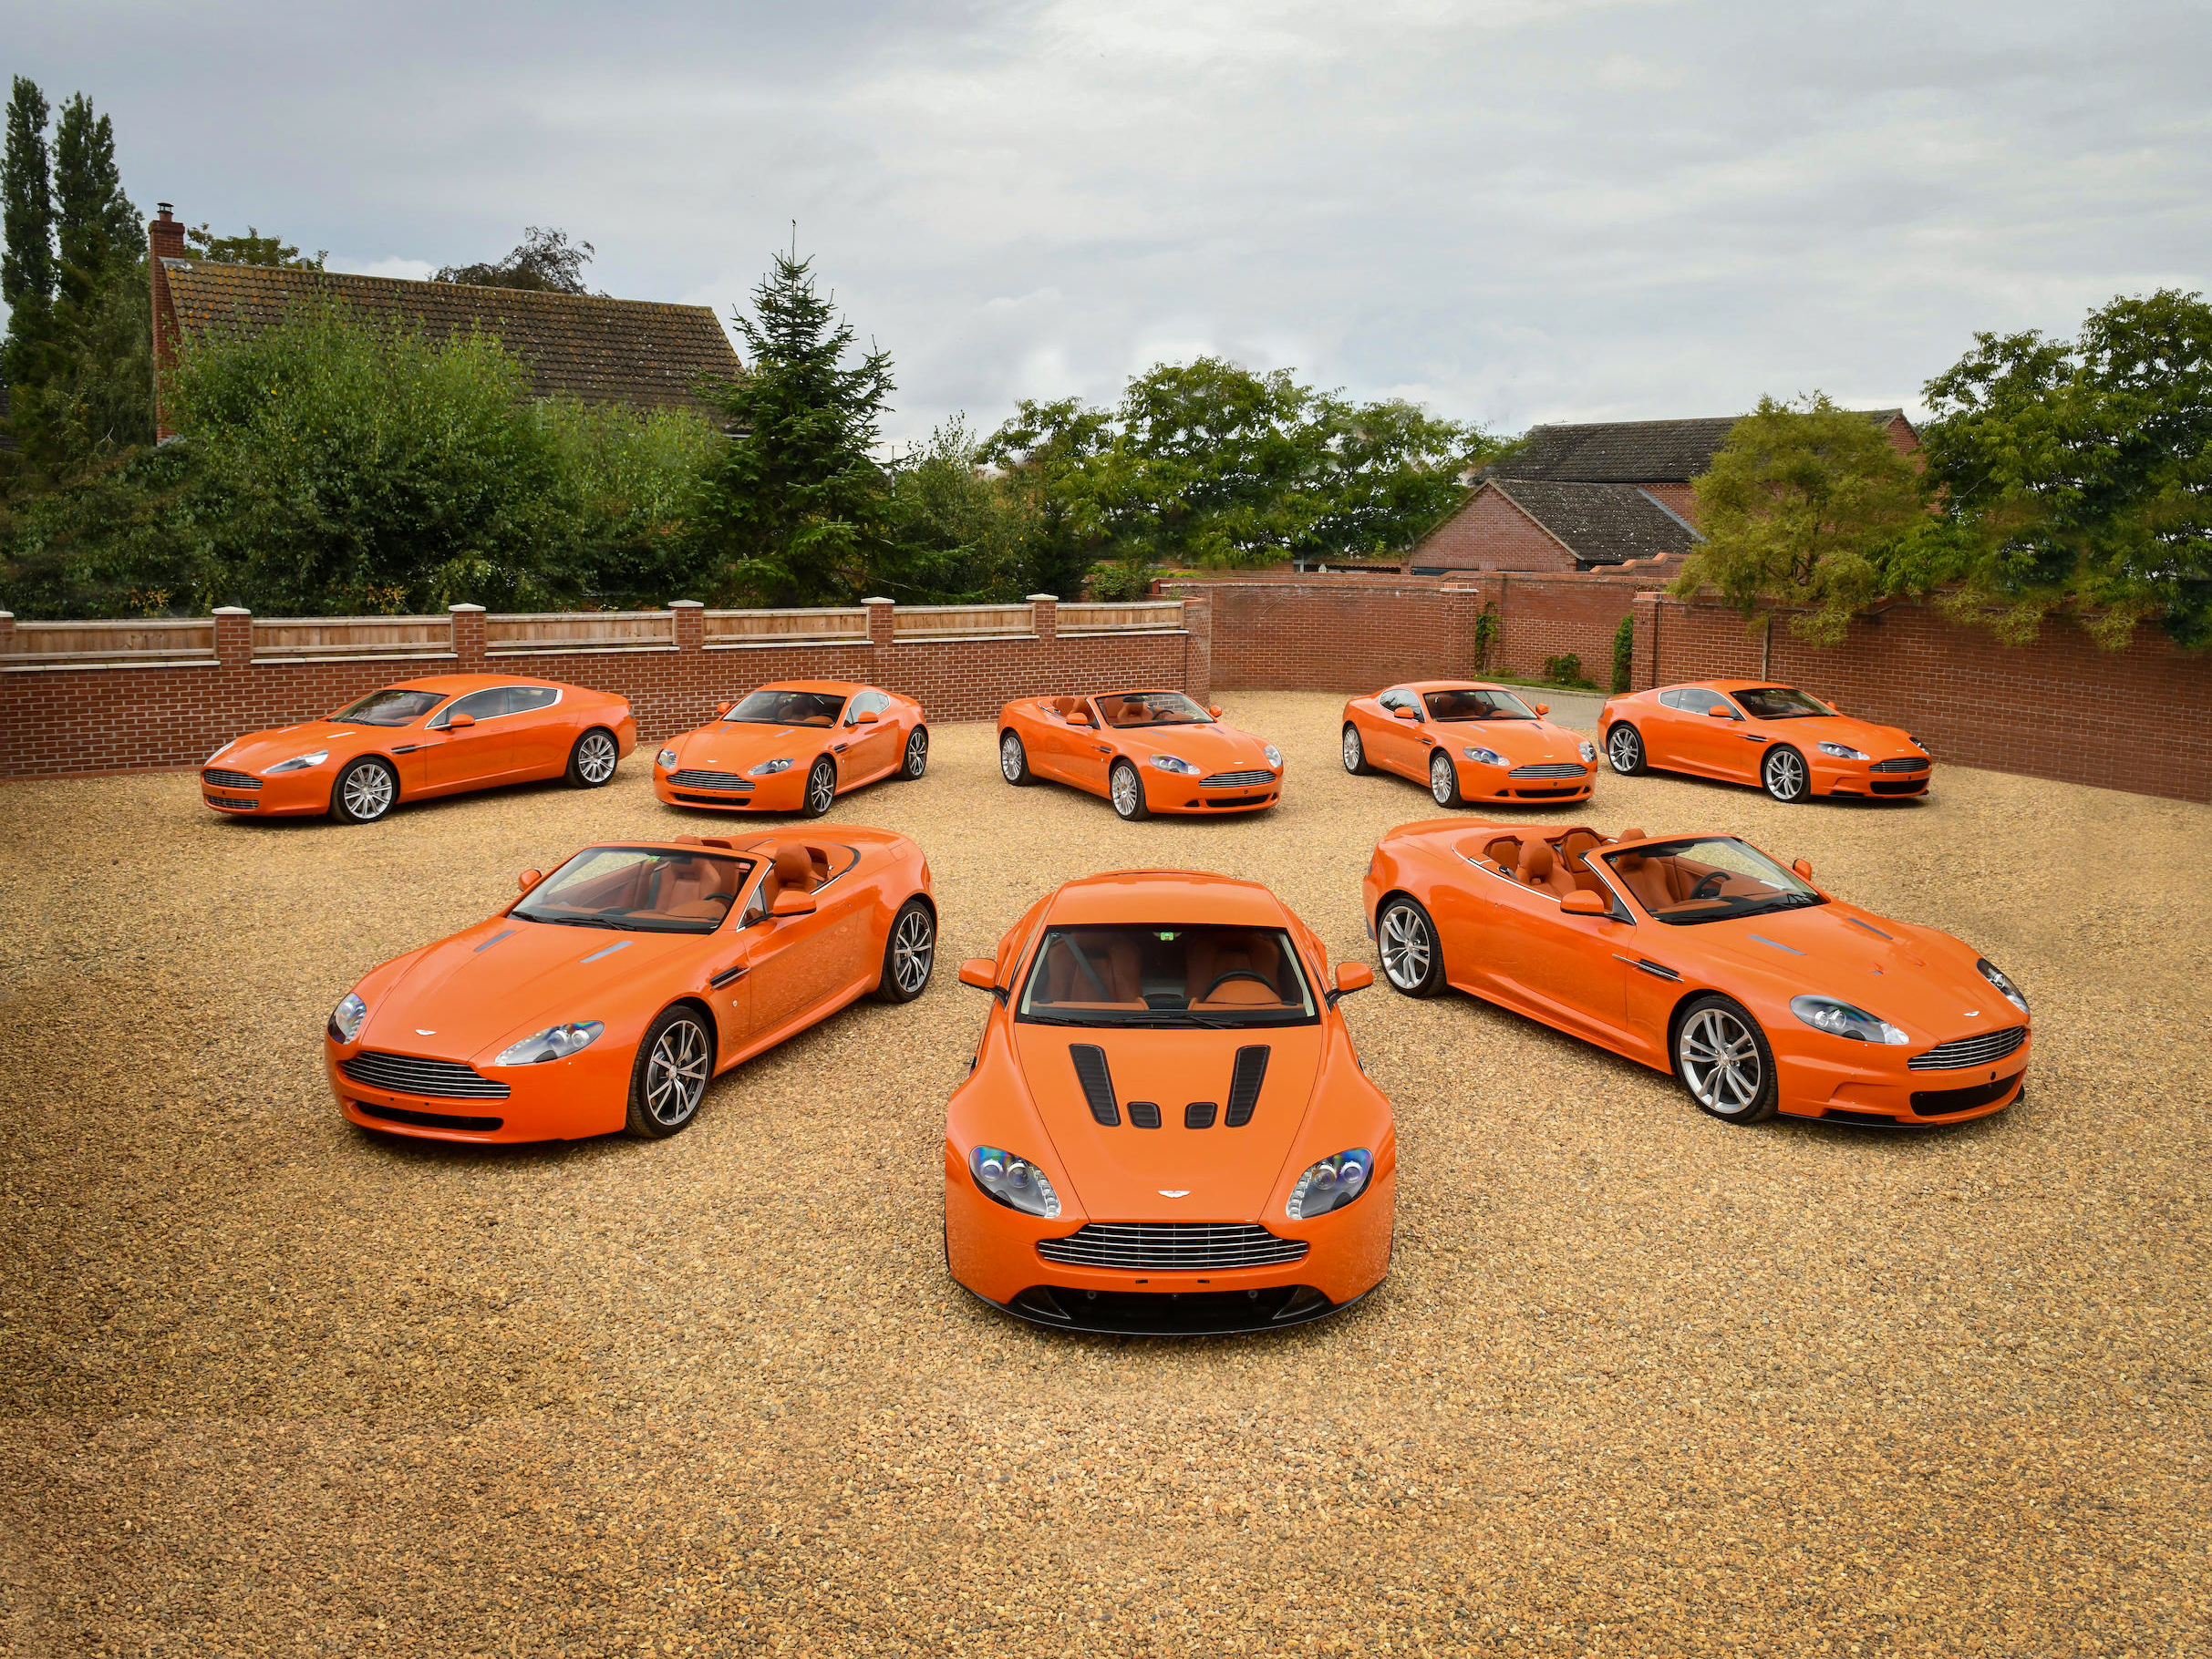 Can't settle for one orange Aston Martin? Try eight